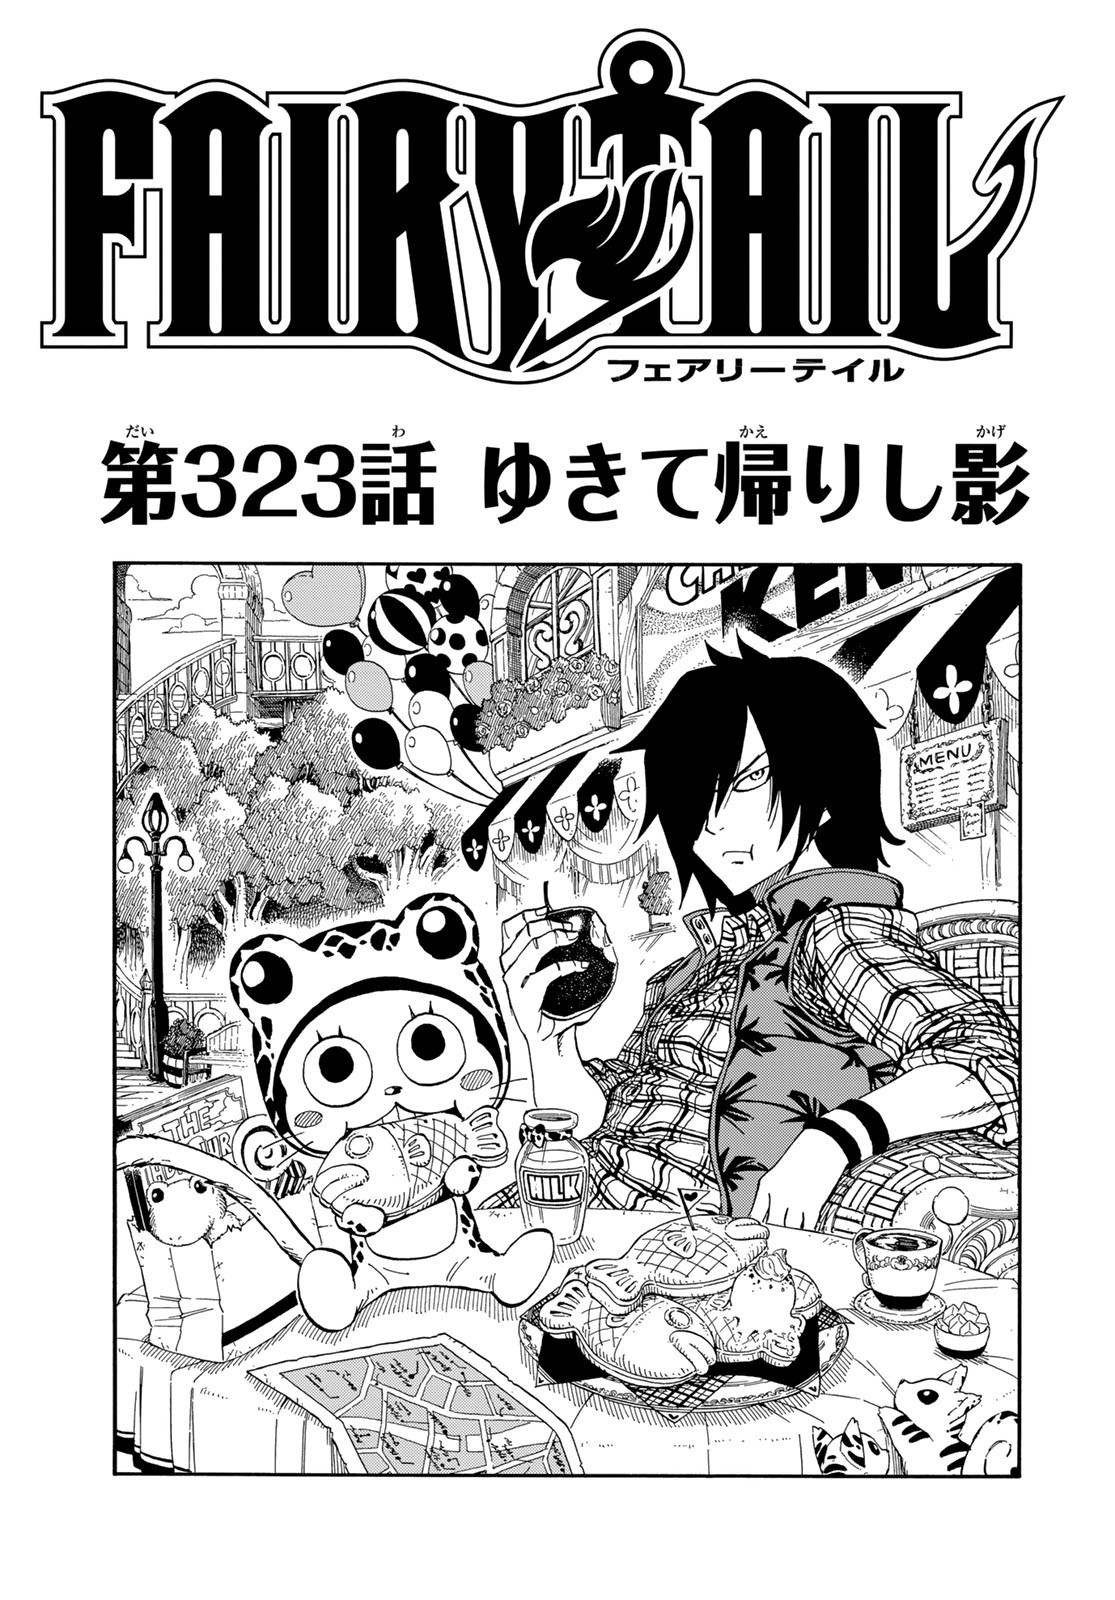 Weekly Shōnen Magazine - 週刊少年マガジン - Chapter 2024-27 - Page 431